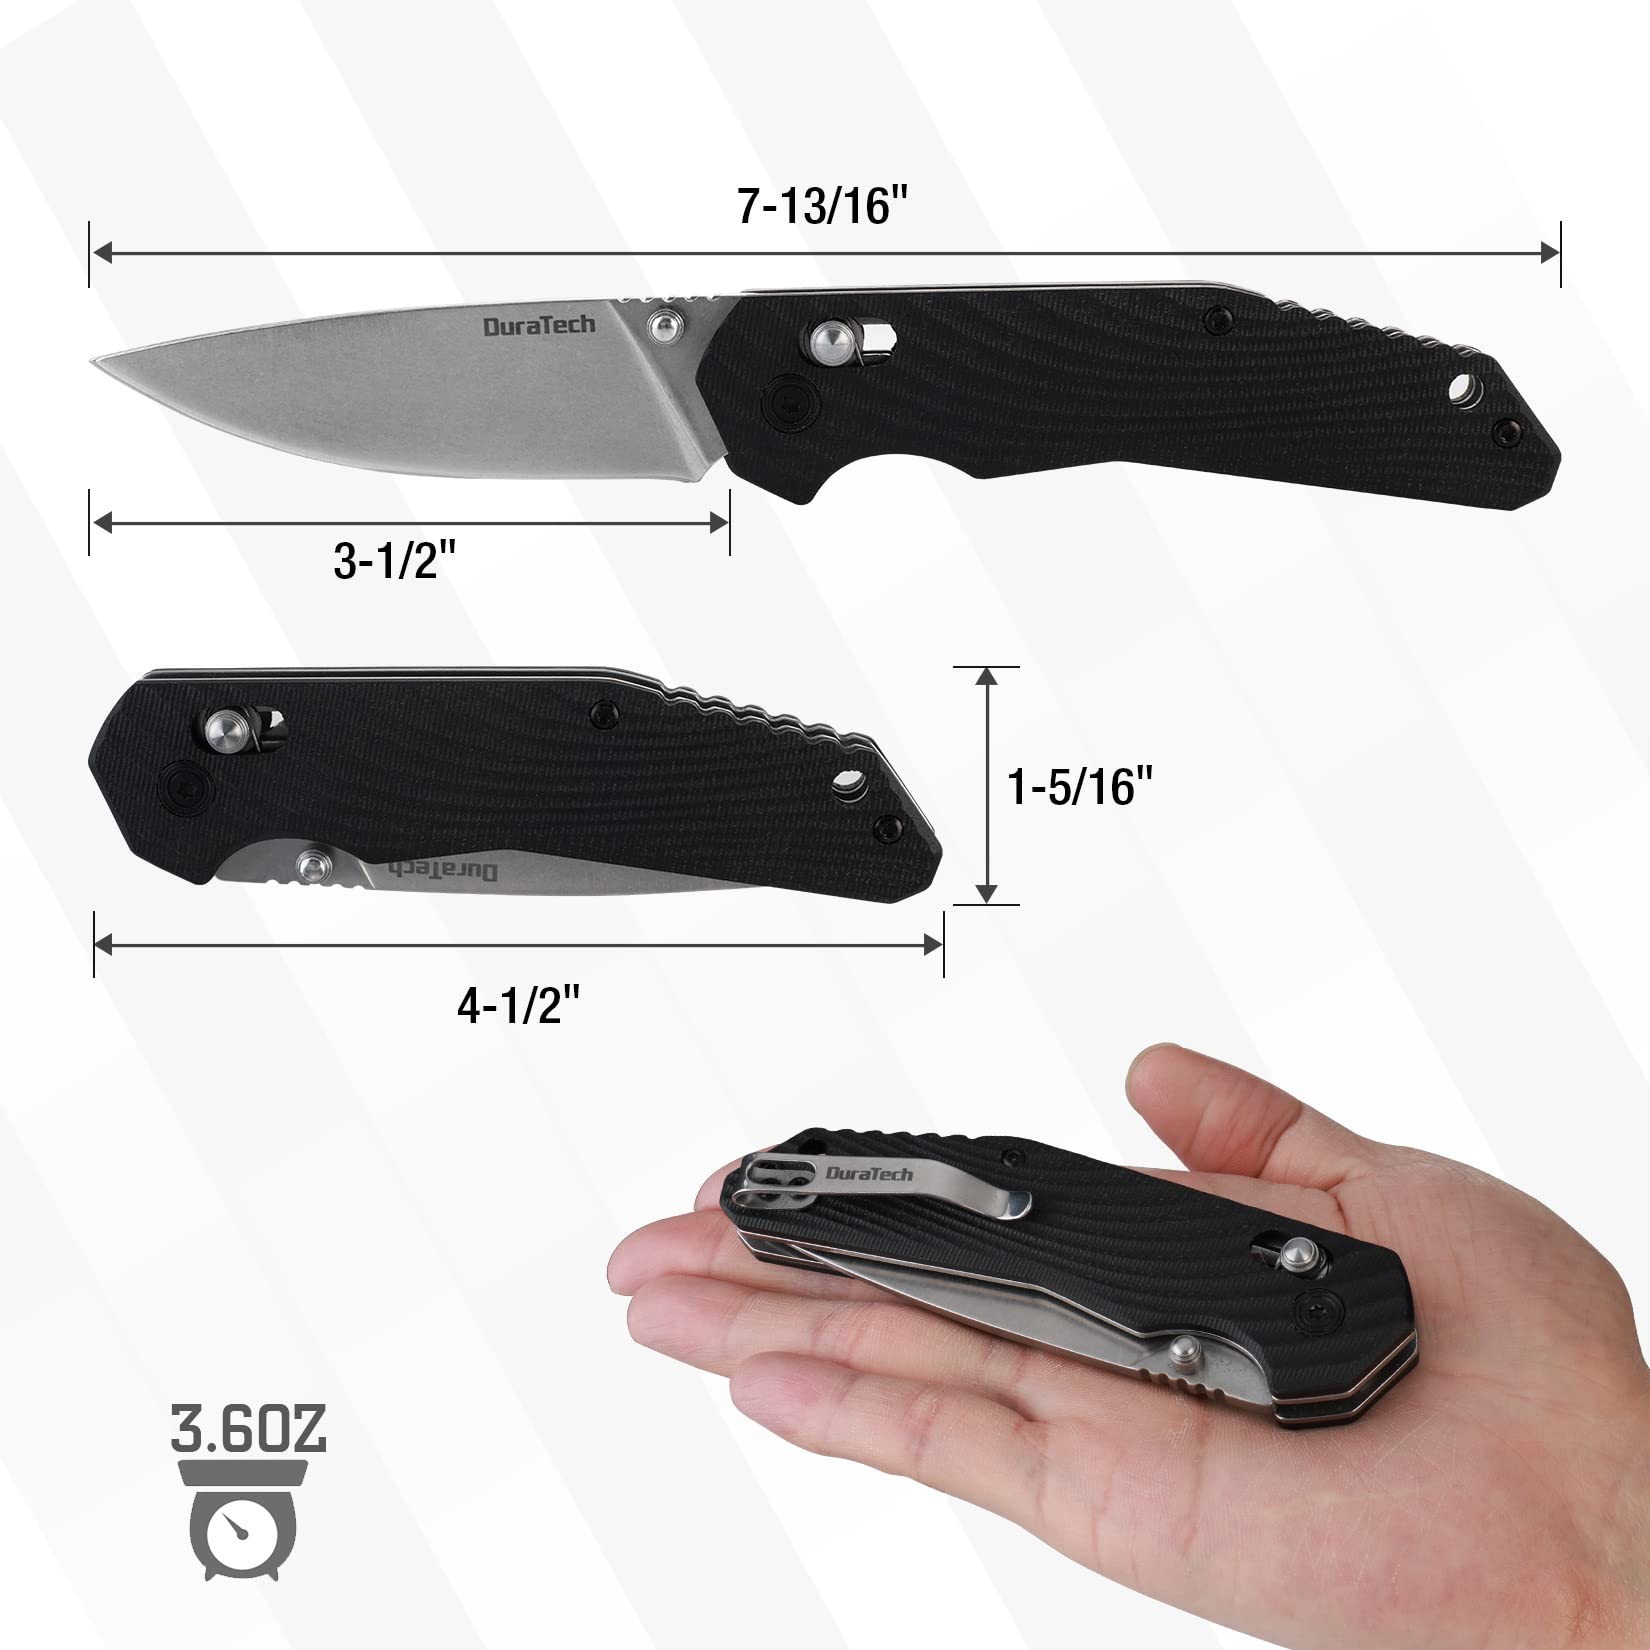 DURATECH Folding Pocket Knife, EDC Pocket Knife with Stainless Steel Blade, G10 Handle Folding Knives, Drop Point Blade, Carry Pocket Clip